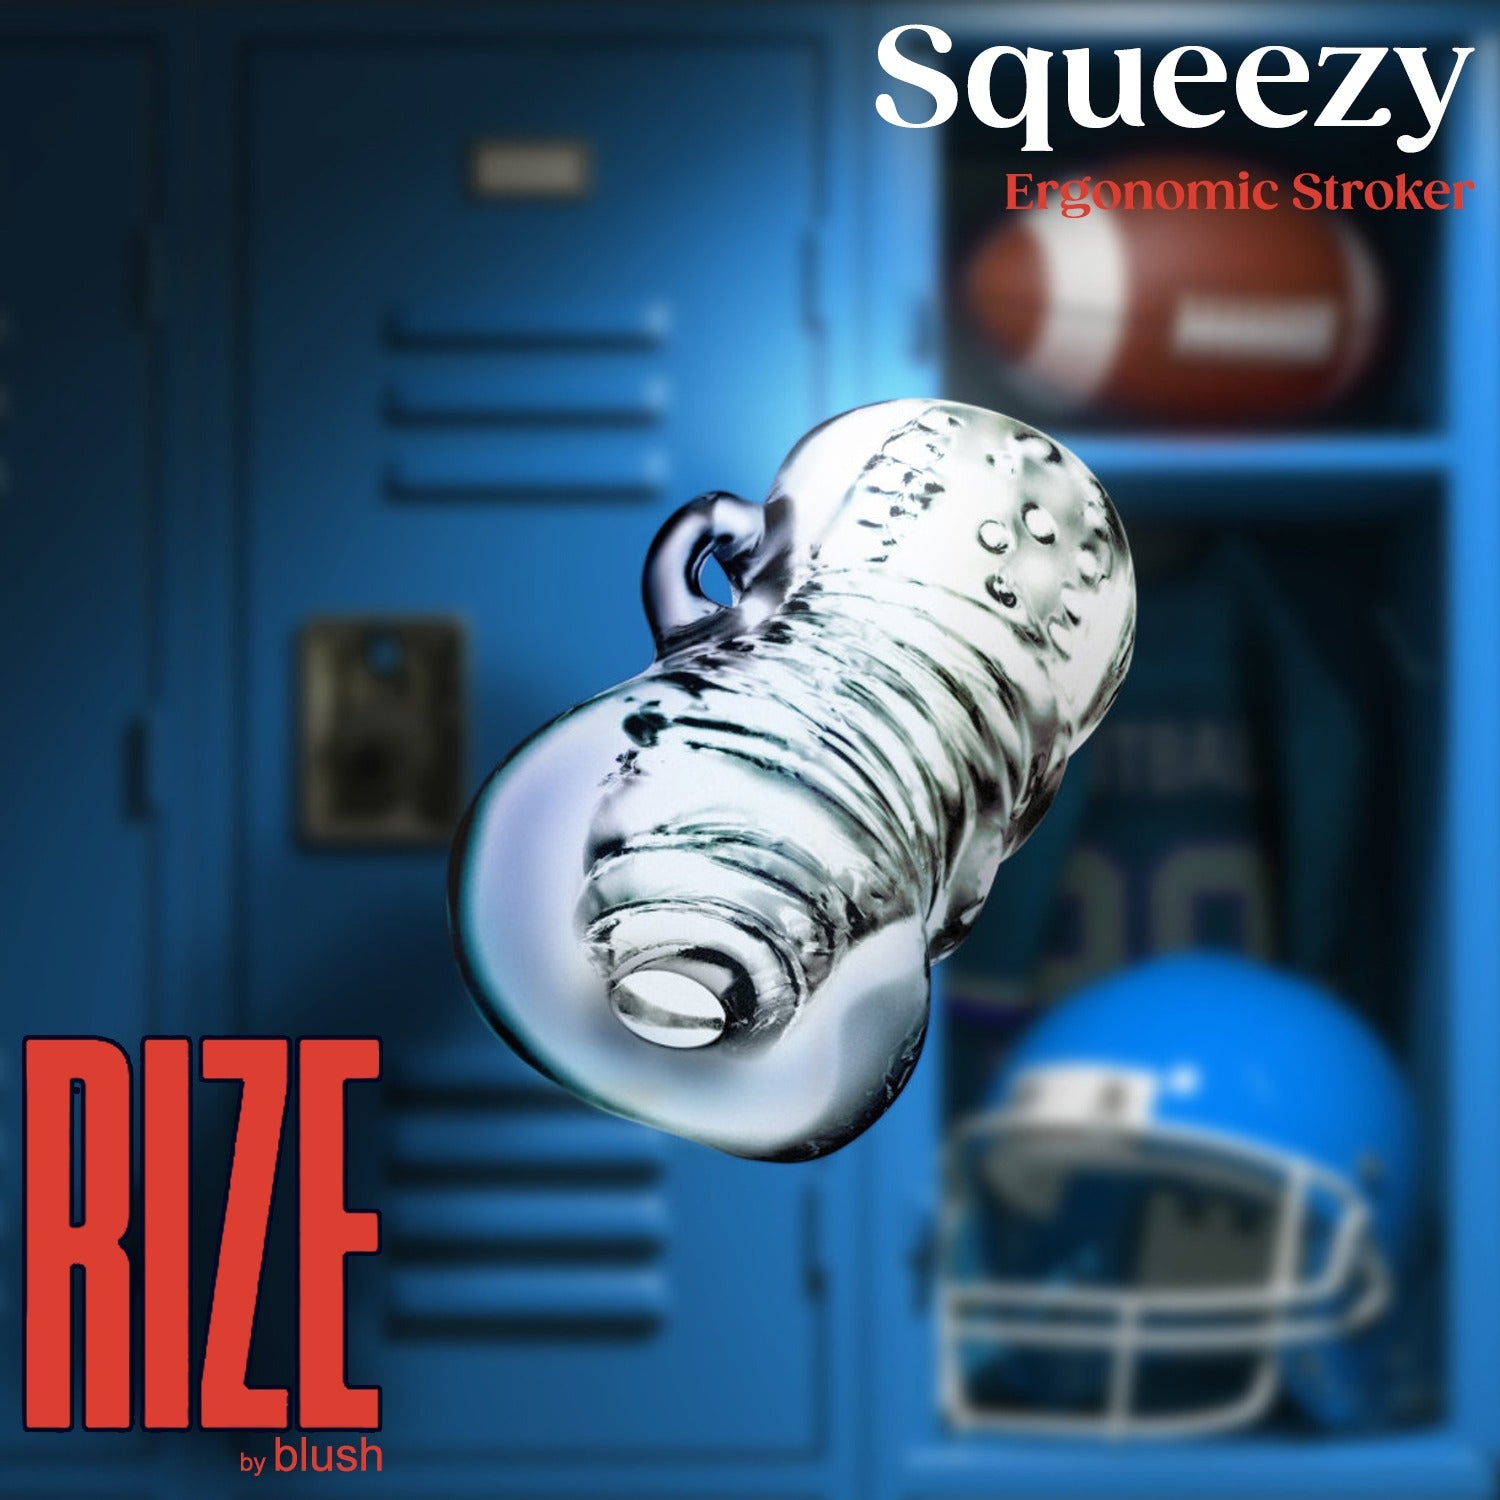 In the background of the image are lockers in what looks like a locker room the locker on the far right is open and inside it is visible an American football, with a helmet on the bottom shelf, and a jersey in the back of the locker hanging up. In focus is the blush Rize! SqueeSqueezy Ergonomic Stroker, bottom left Rizeroduct name Squeezy Ergonomic Stroker, bottom left Rize by blush logo.